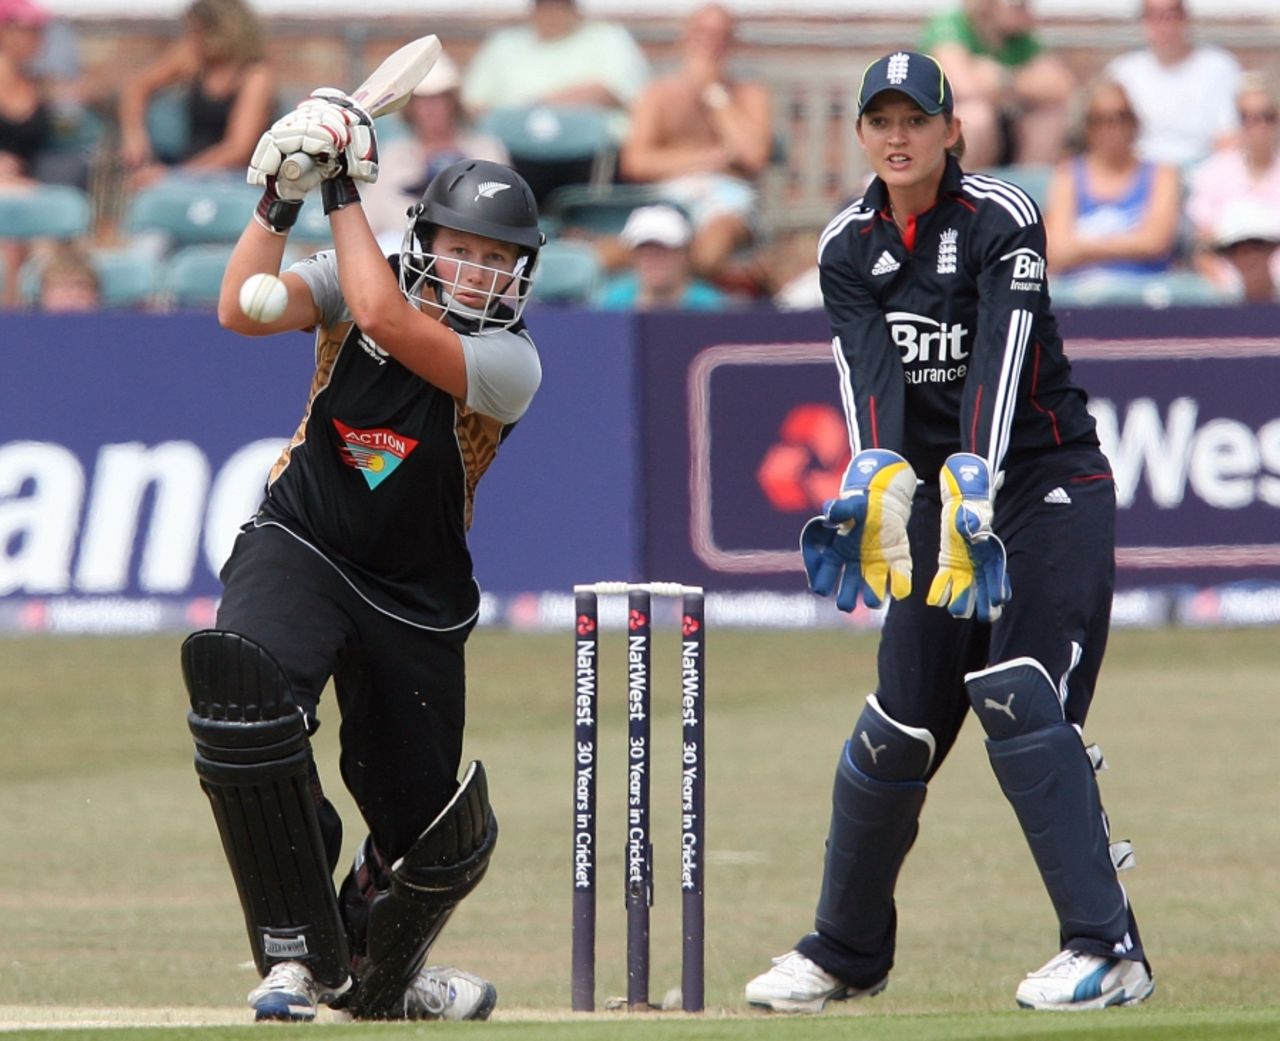 Aimee Watkins put on 50 for the first wicket with Suzie Bates, England Women v New Zealand Women, 3rd Twenty20, Hove, July 2, 2010